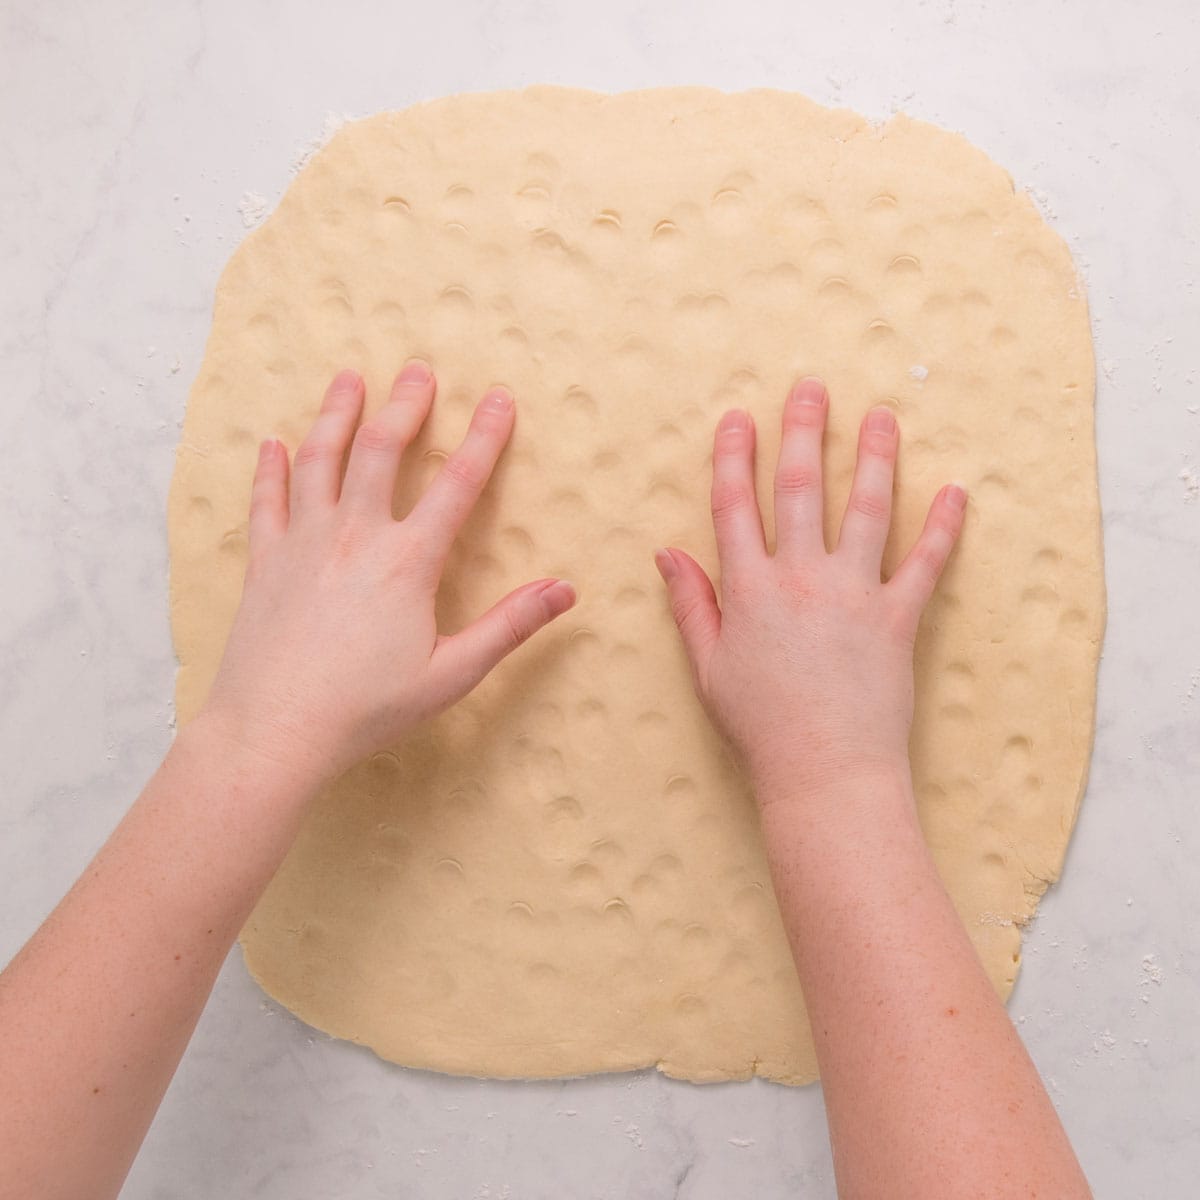 Hands lightly pressing the surface of the dough to create dimples all over.